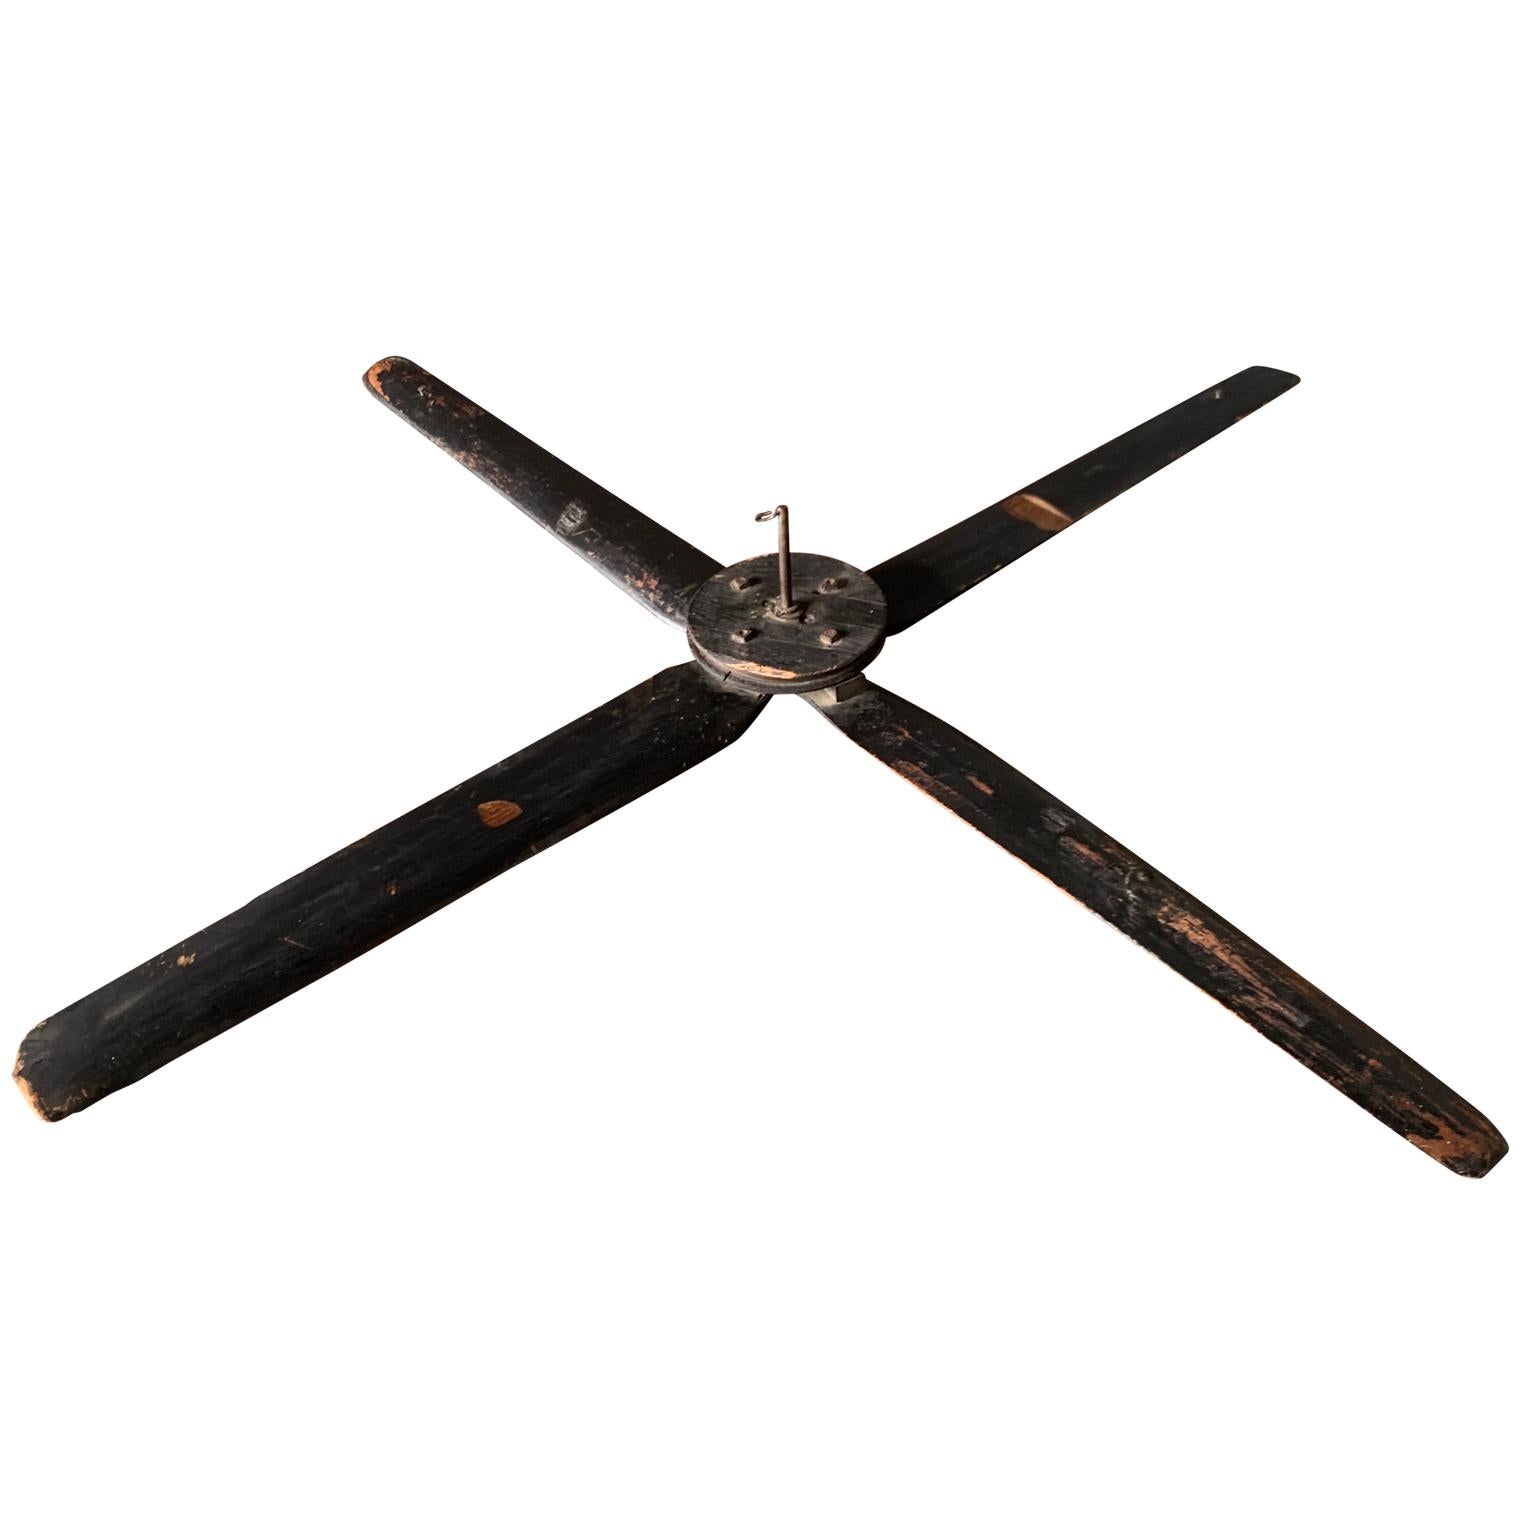 Large French black-painted wooden ceiling fan.